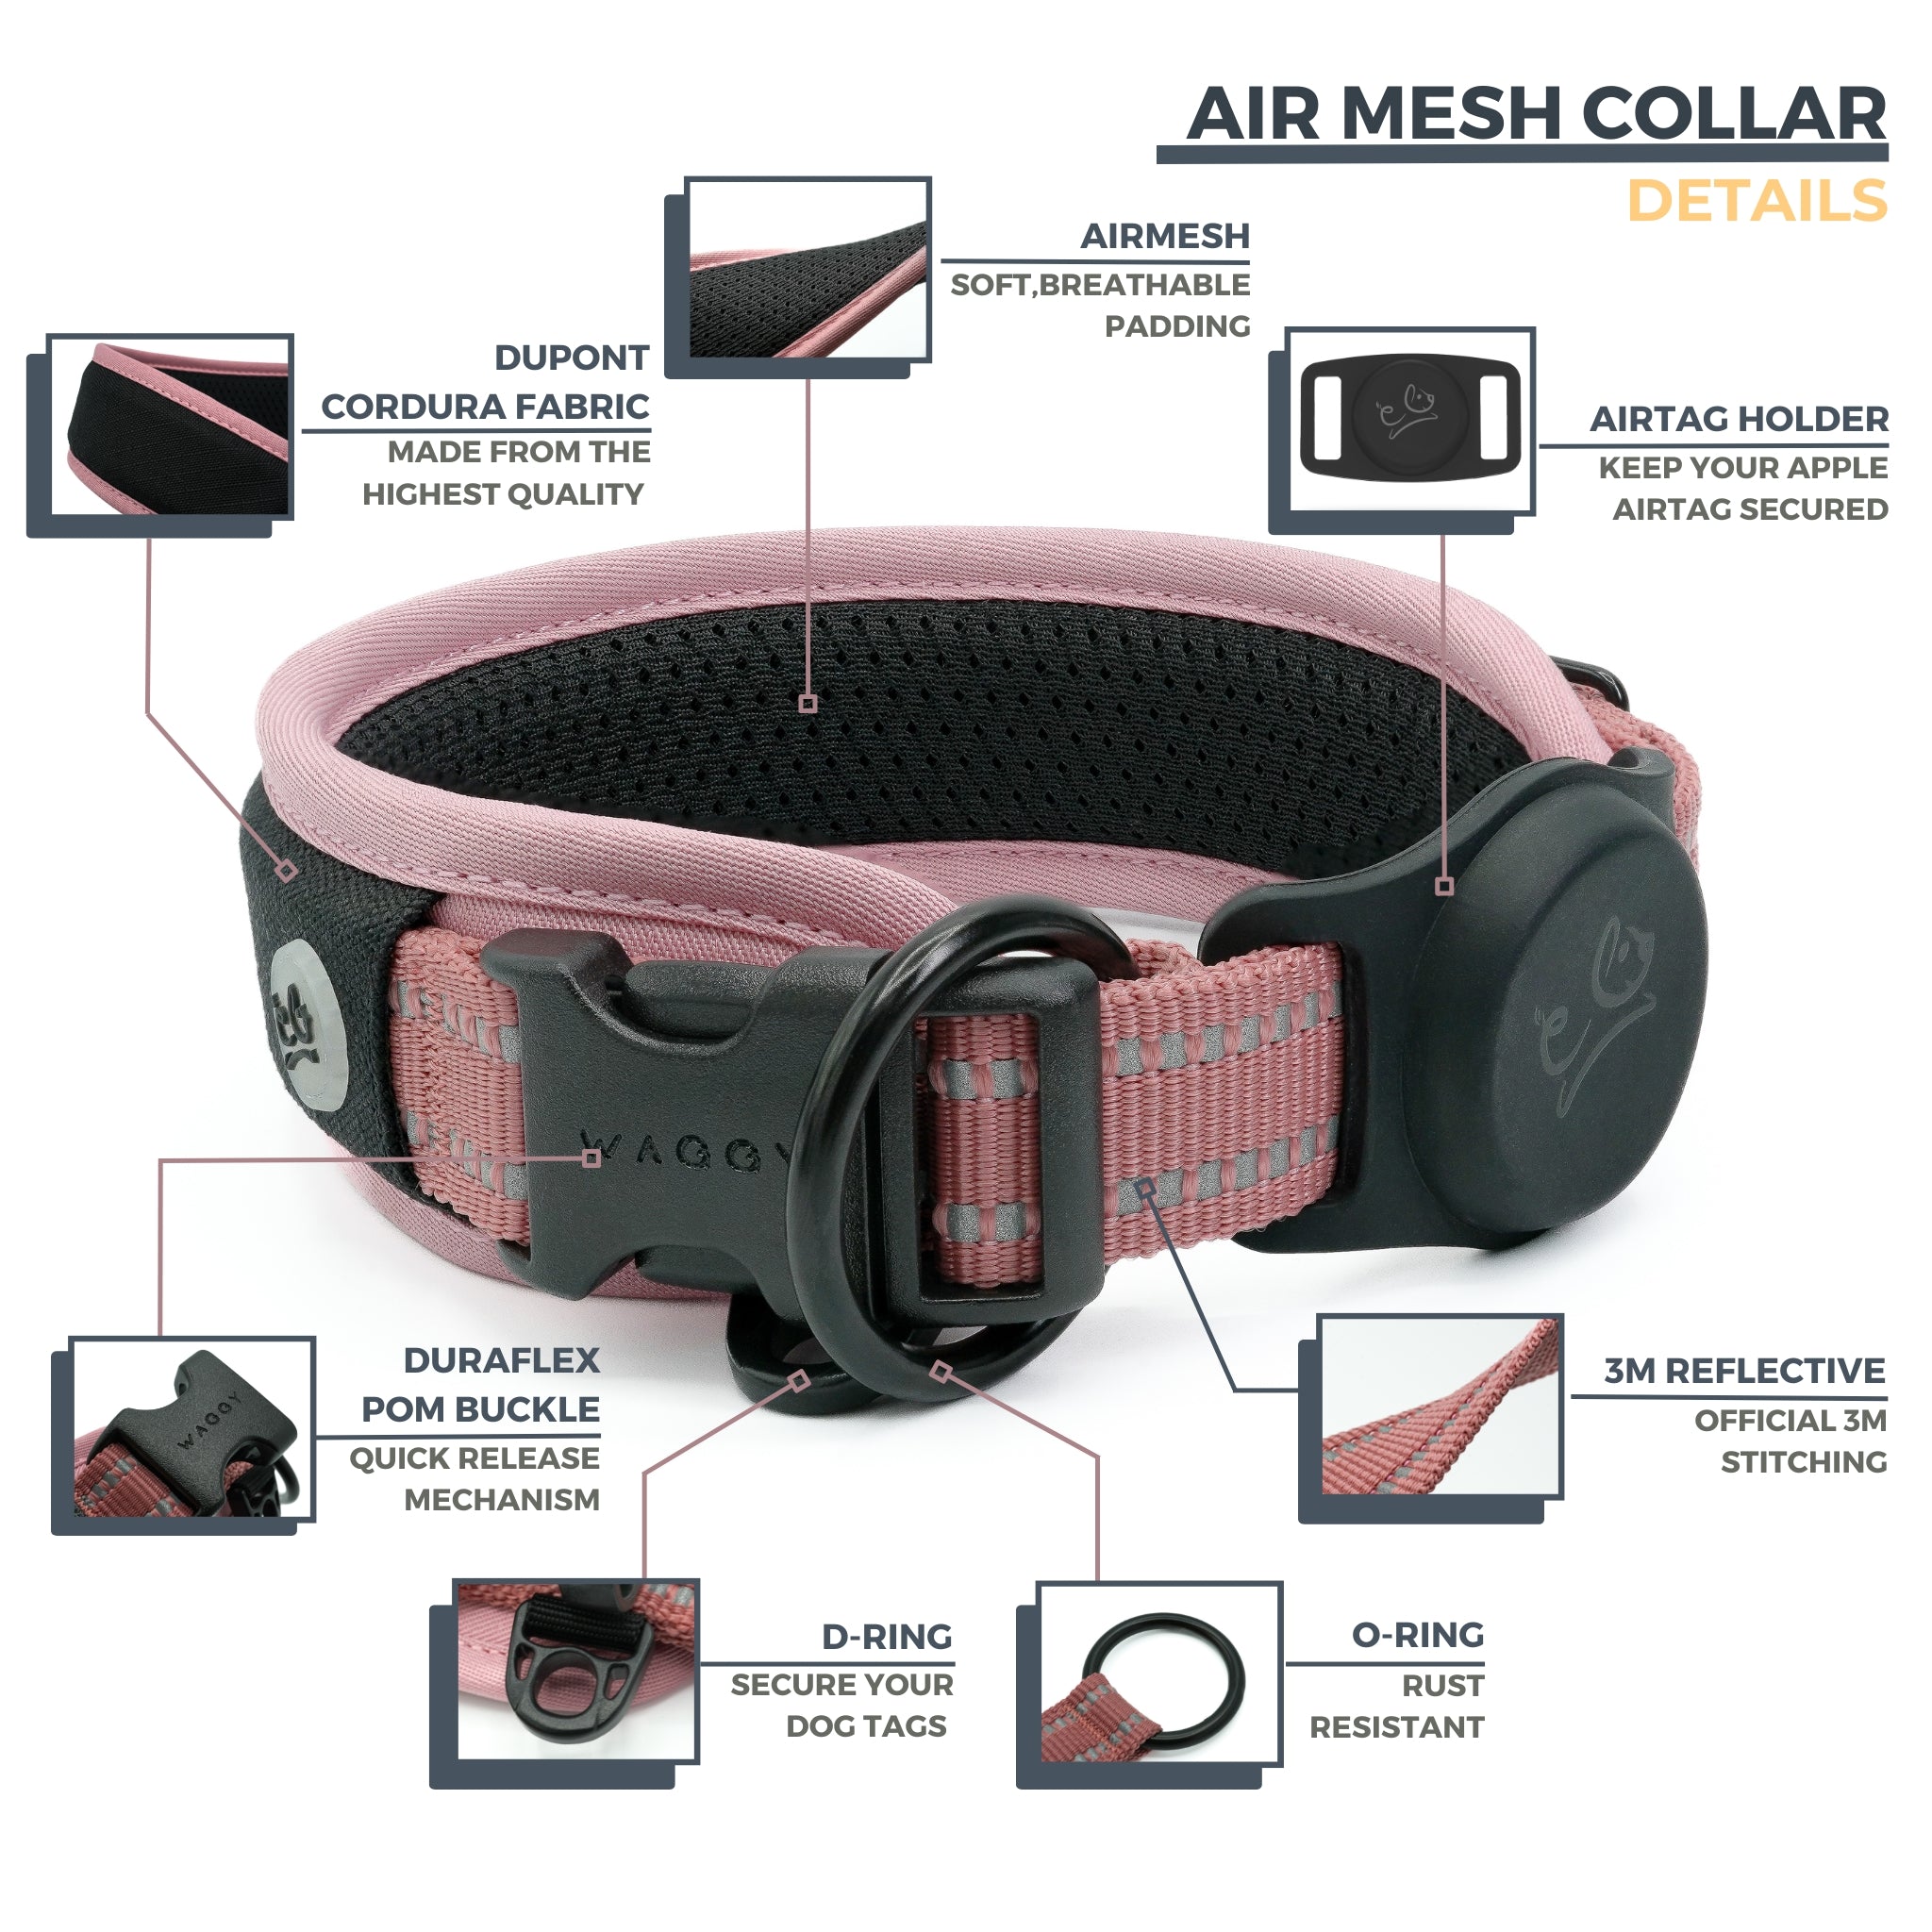 7 features & details regarding Pink Air Mesh dog collar. Dupont Cordura Fabric; Air Mesh padding; Airtag Holder; Duraflex buckle; D-ring; O-ring; 3M Reflective stitching with short description and close up images.